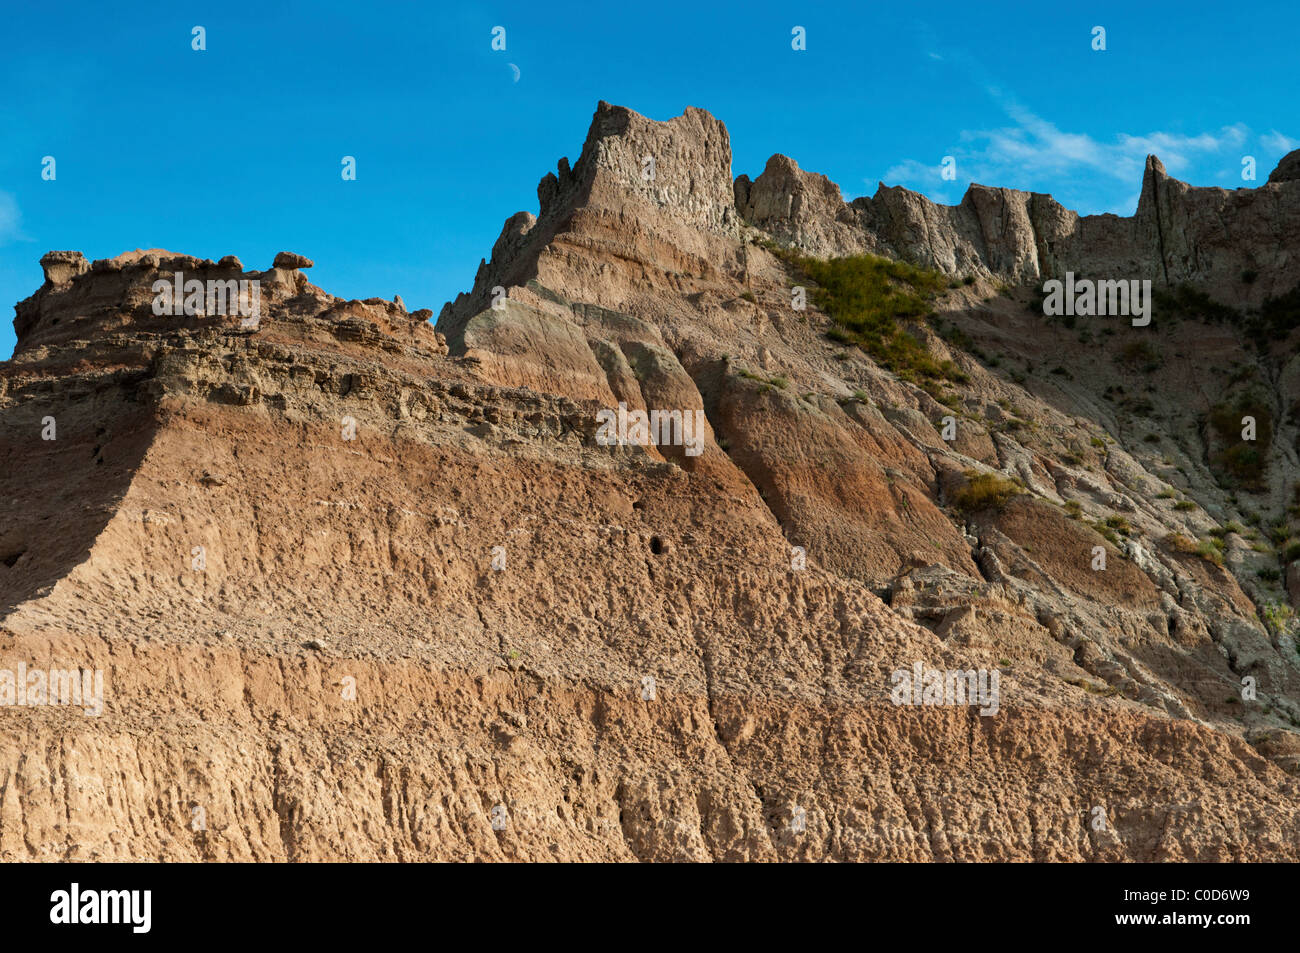 South Dakota, the detail of the eroded hillside at The Badlands National Monument. Stock Photo